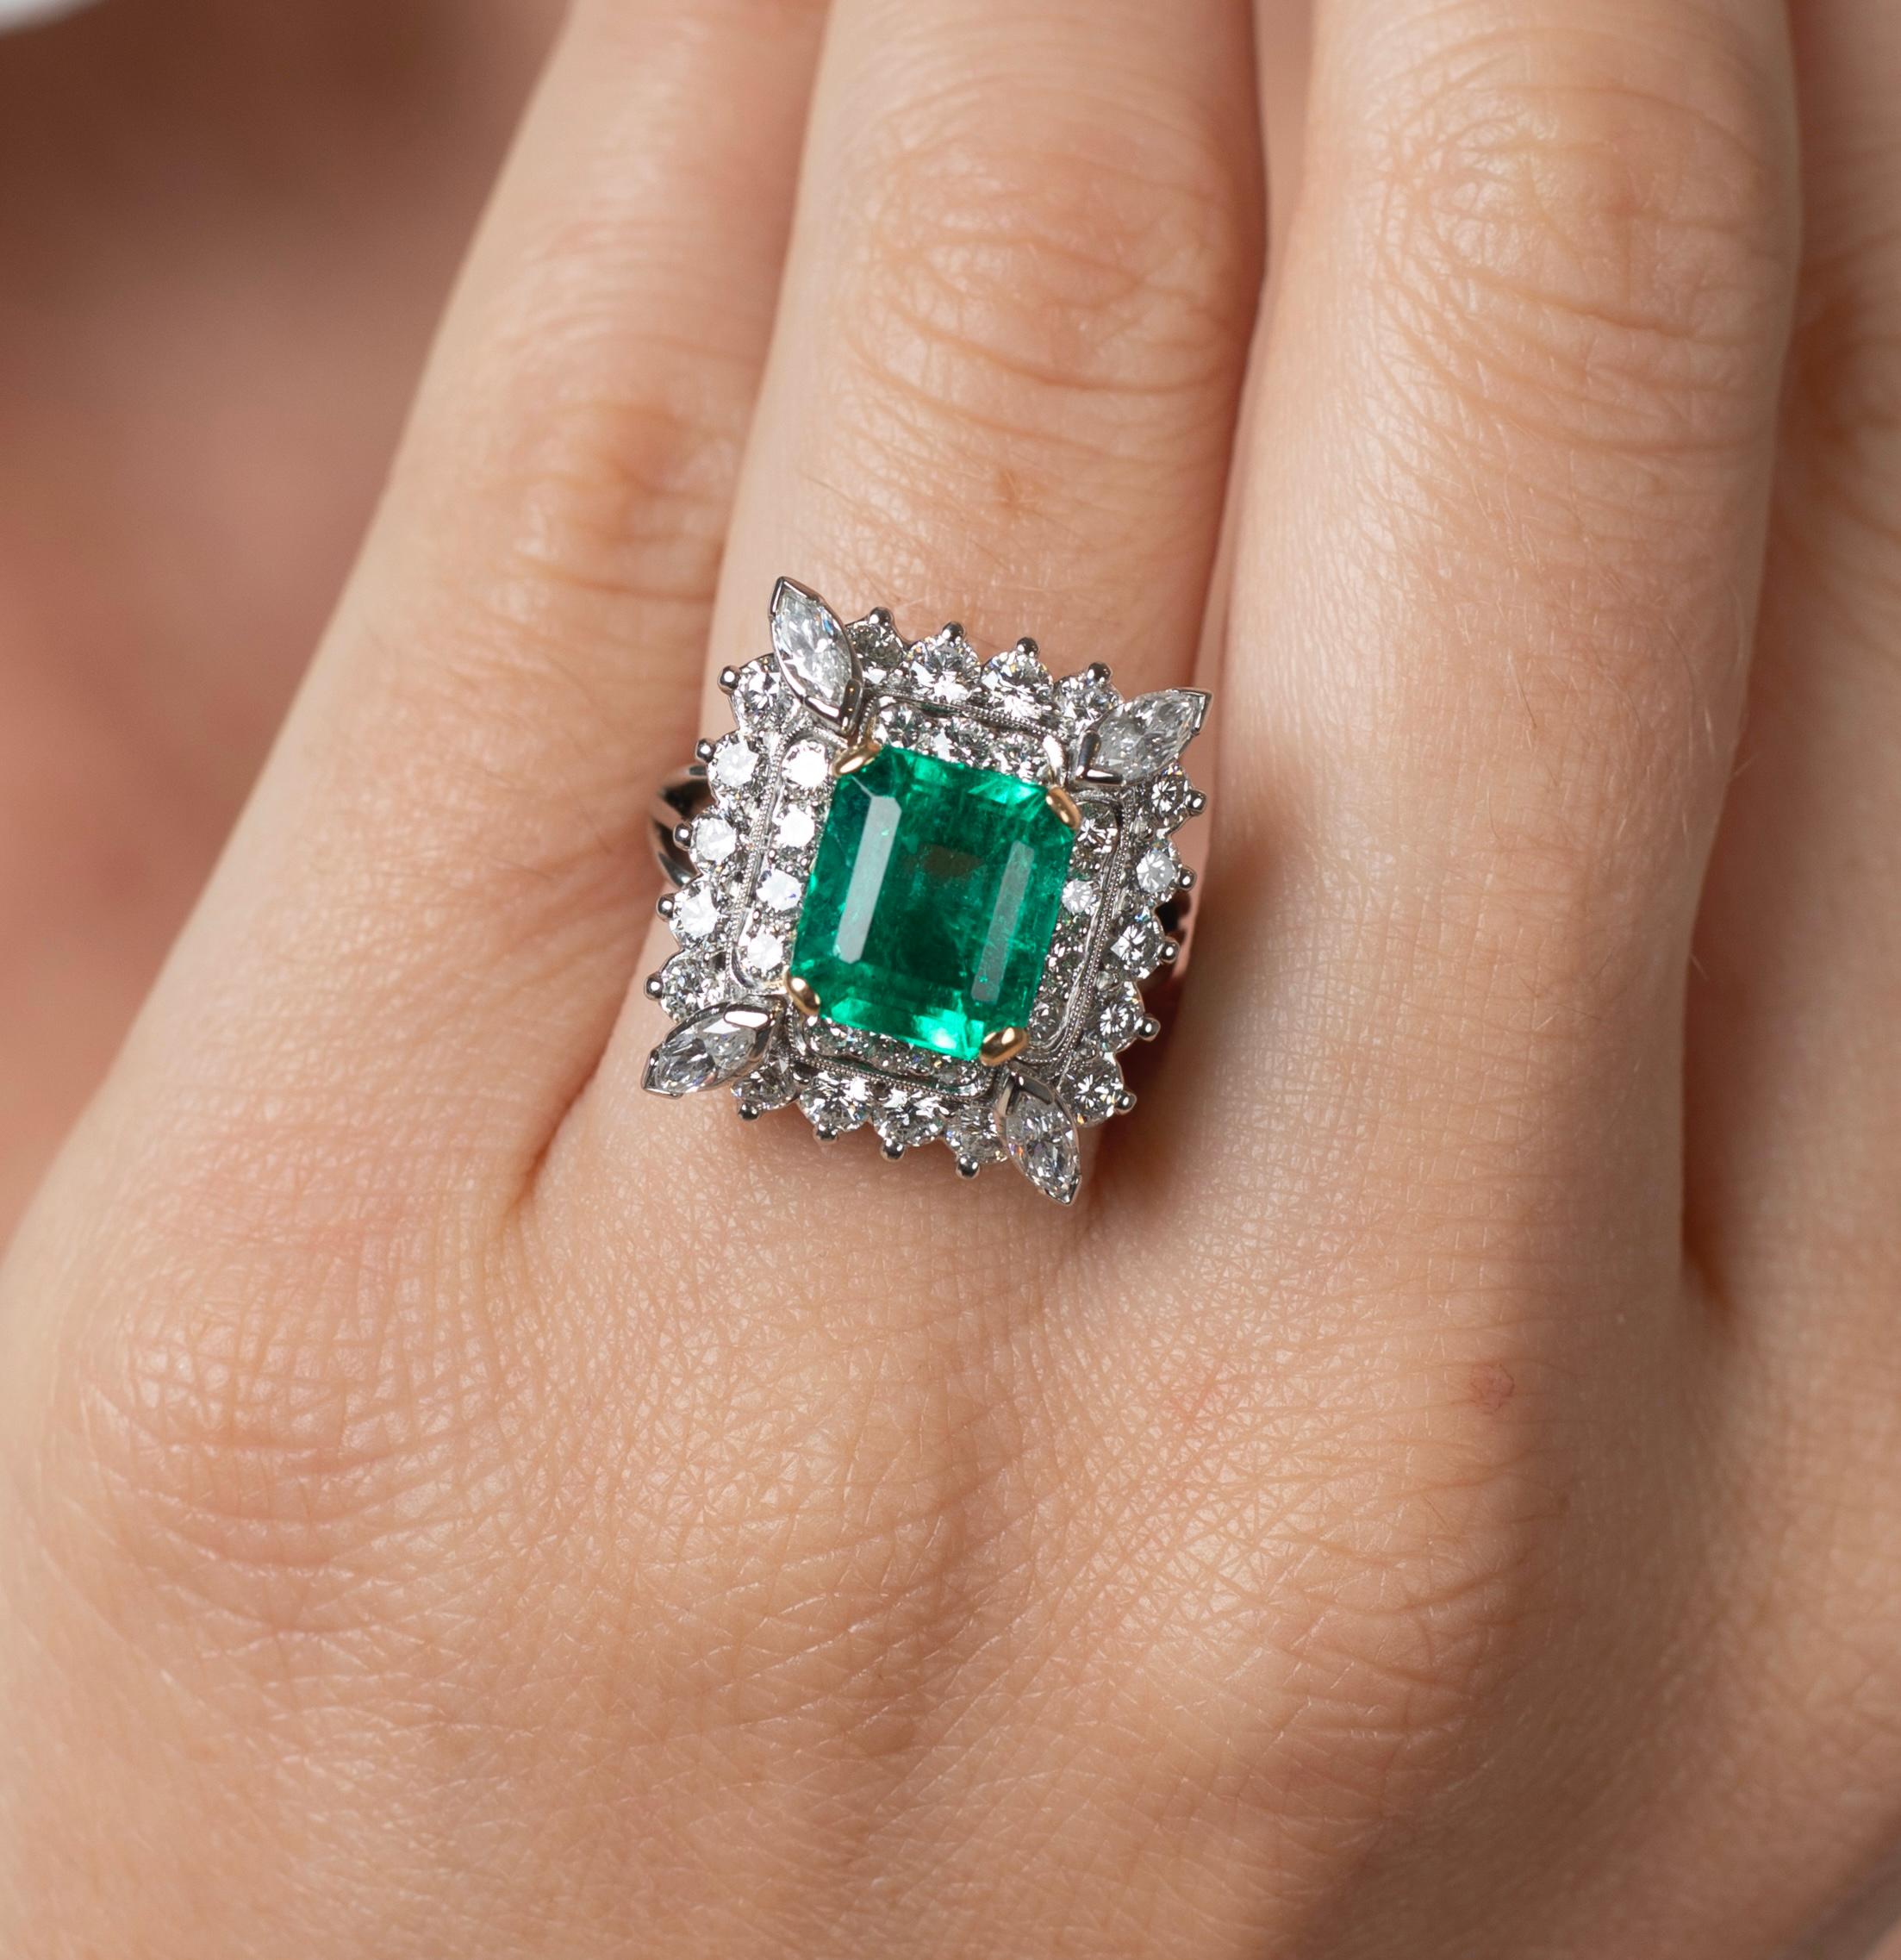 3.31 Carat vivid green natural Emerald center stone mounted with 2 carats in diamonds and set in platinum. Signed 